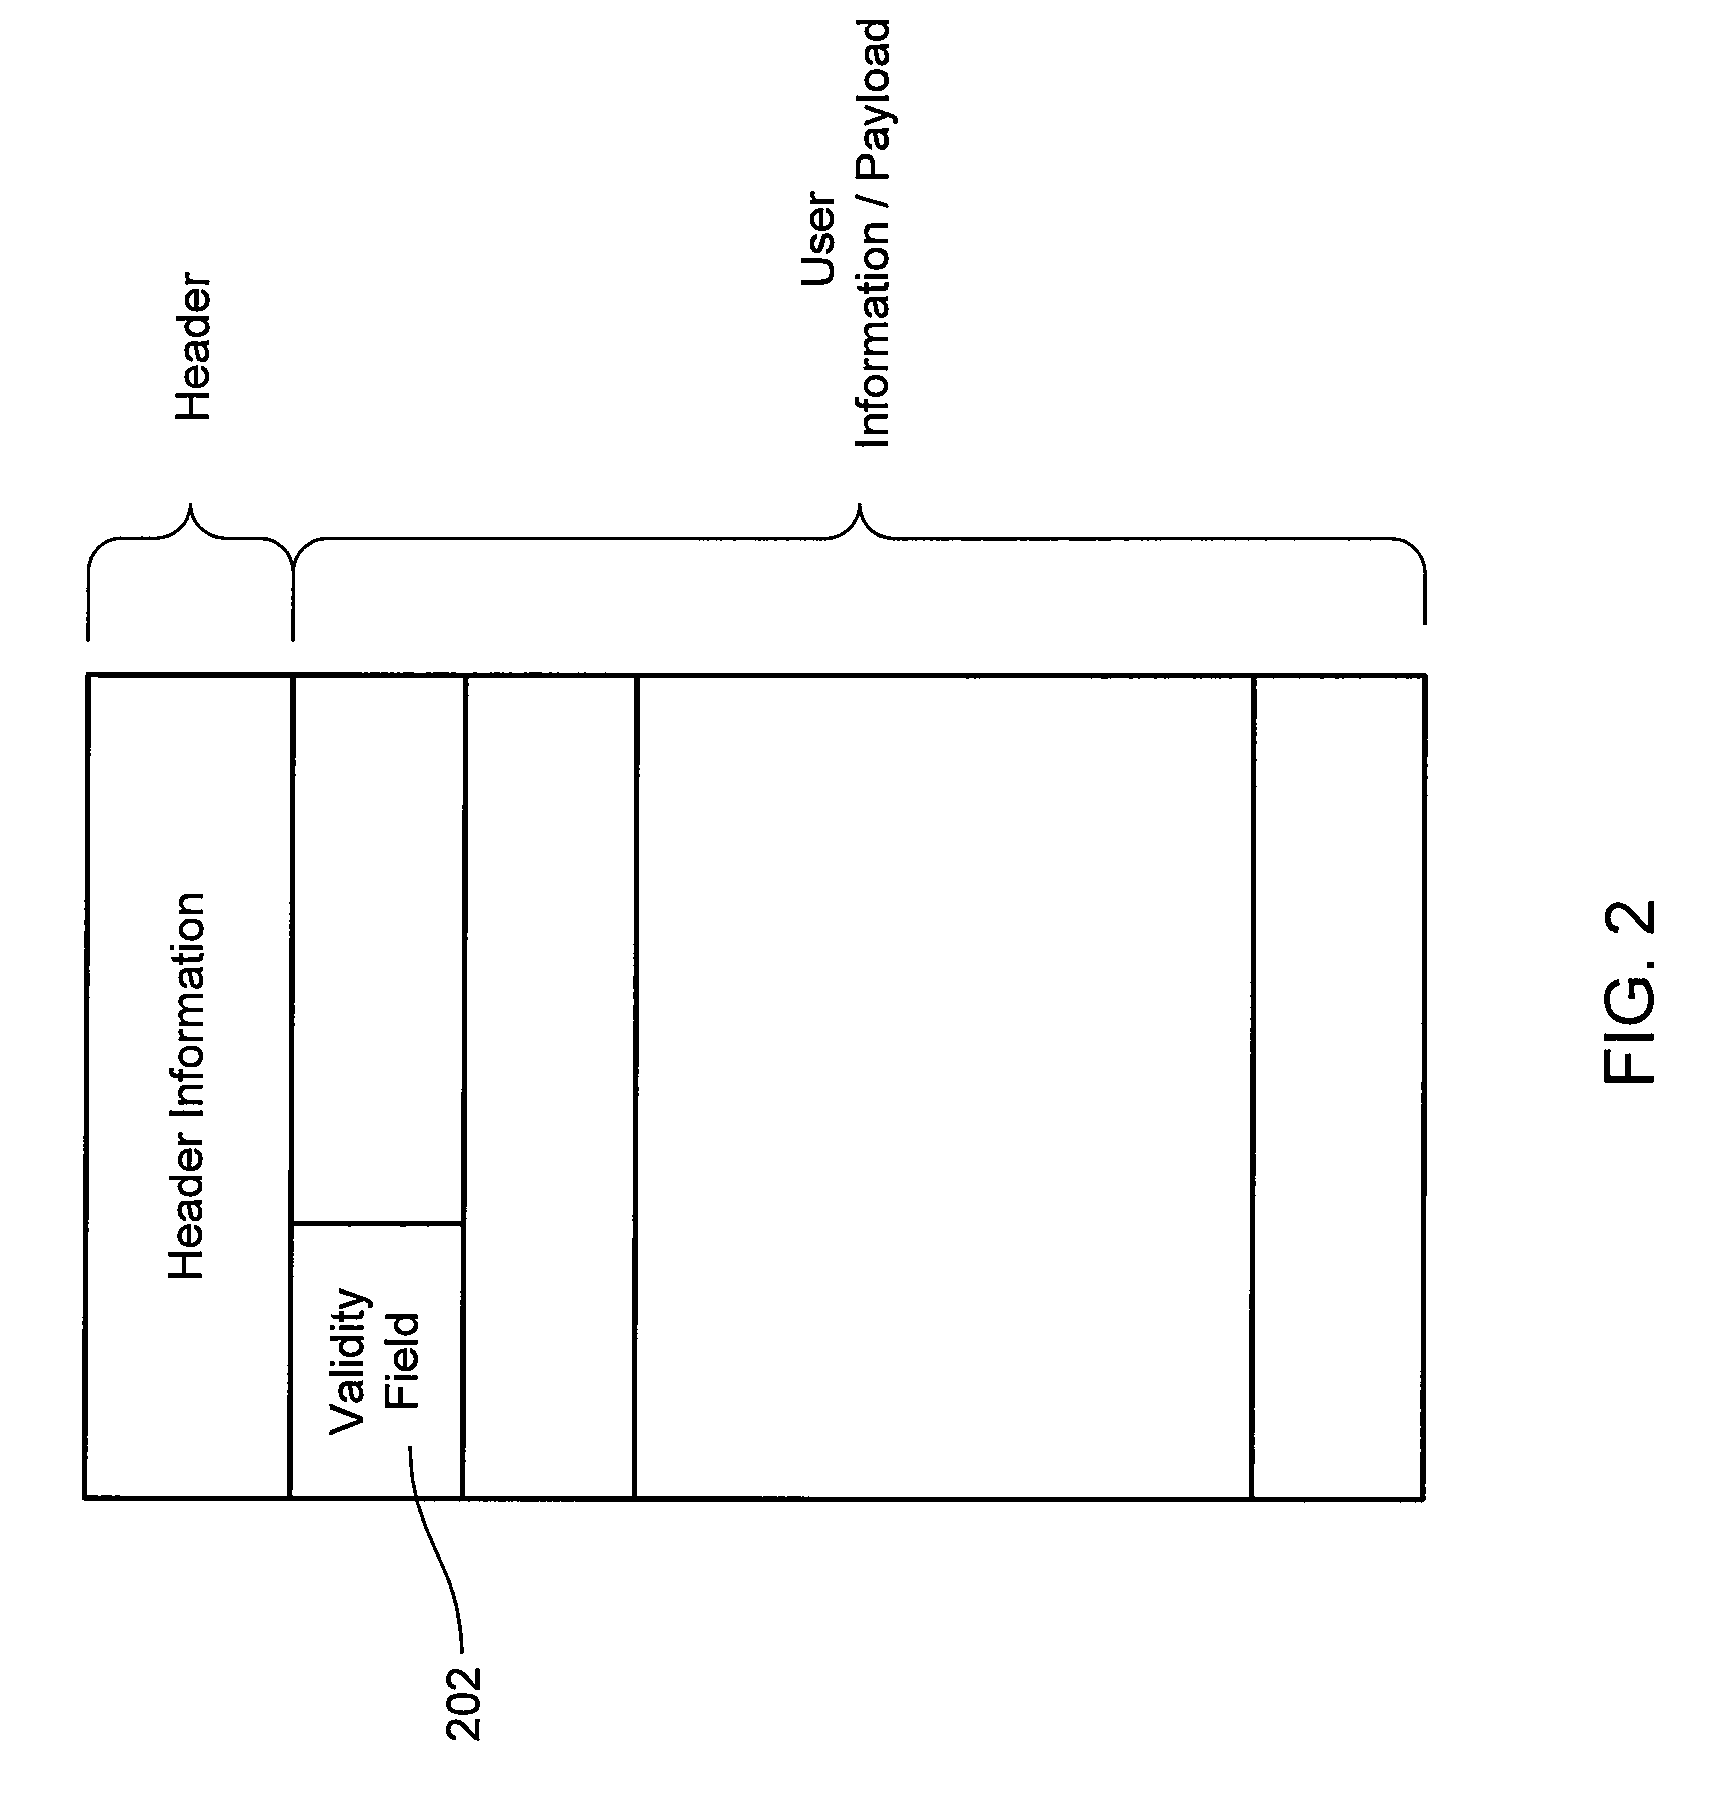 Method and system for providing transport of channelized circuits of arbitrary bit rate through asynchronous transfer mode (ATM) circuit emulation services (CES)